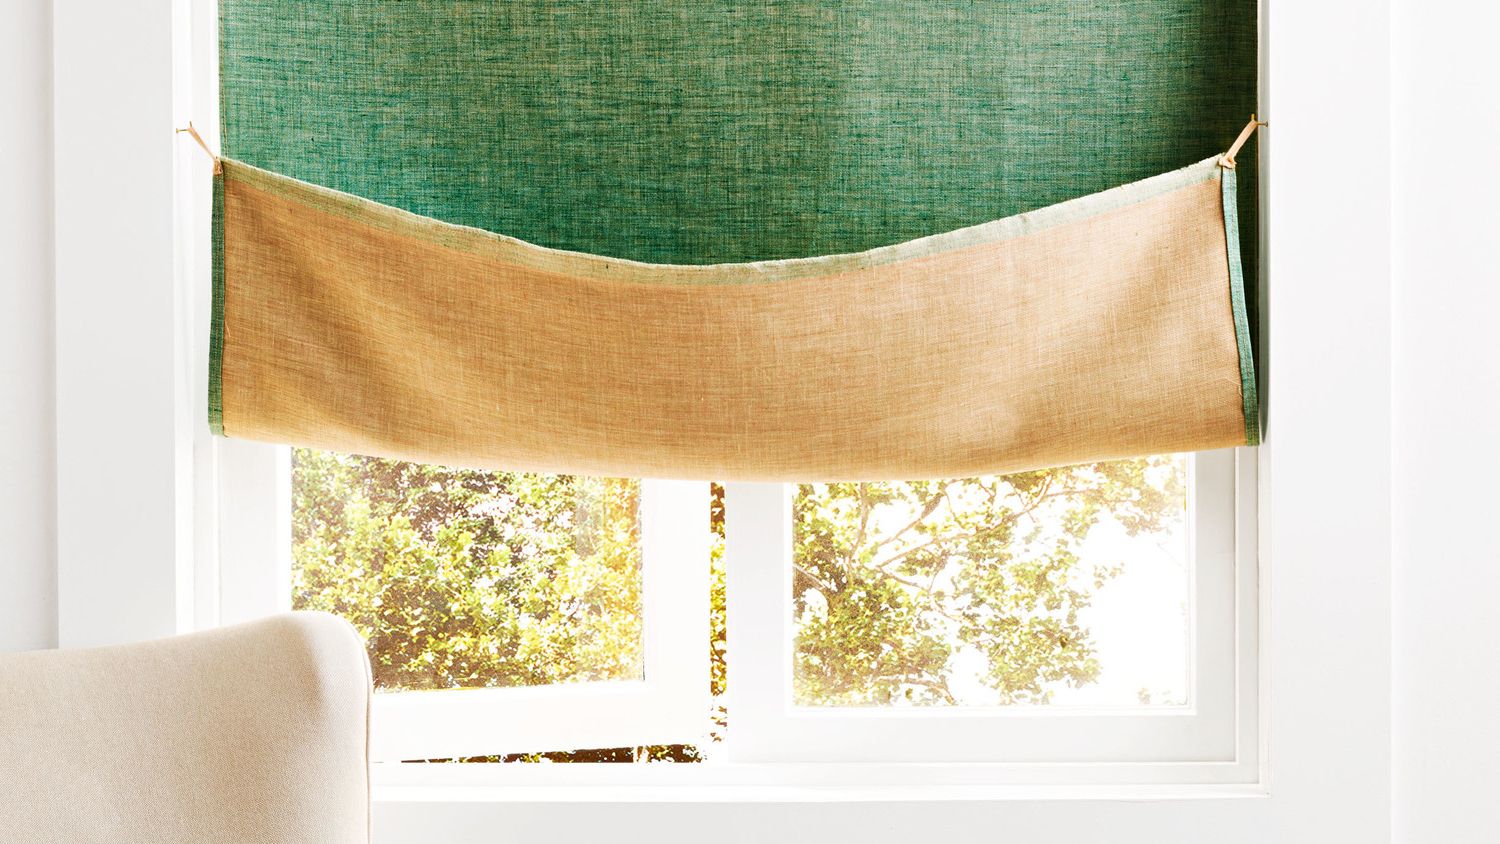 [%hot Bargains! 50% Off Archaeo Washed Cotton Twist Tab Within Favorite Archaeo Washed Cotton Twist Tab Single Curtain Panels|archaeo Washed Cotton Twist Tab Single Curtain Panels For Favorite Hot Bargains! 50% Off Archaeo Washed Cotton Twist Tab|latest Archaeo Washed Cotton Twist Tab Single Curtain Panels Regarding Hot Bargains! 50% Off Archaeo Washed Cotton Twist Tab|famous Hot Bargains! 50% Off Archaeo Washed Cotton Twist Tab Inside Archaeo Washed Cotton Twist Tab Single Curtain Panels%] (View 15 of 20)